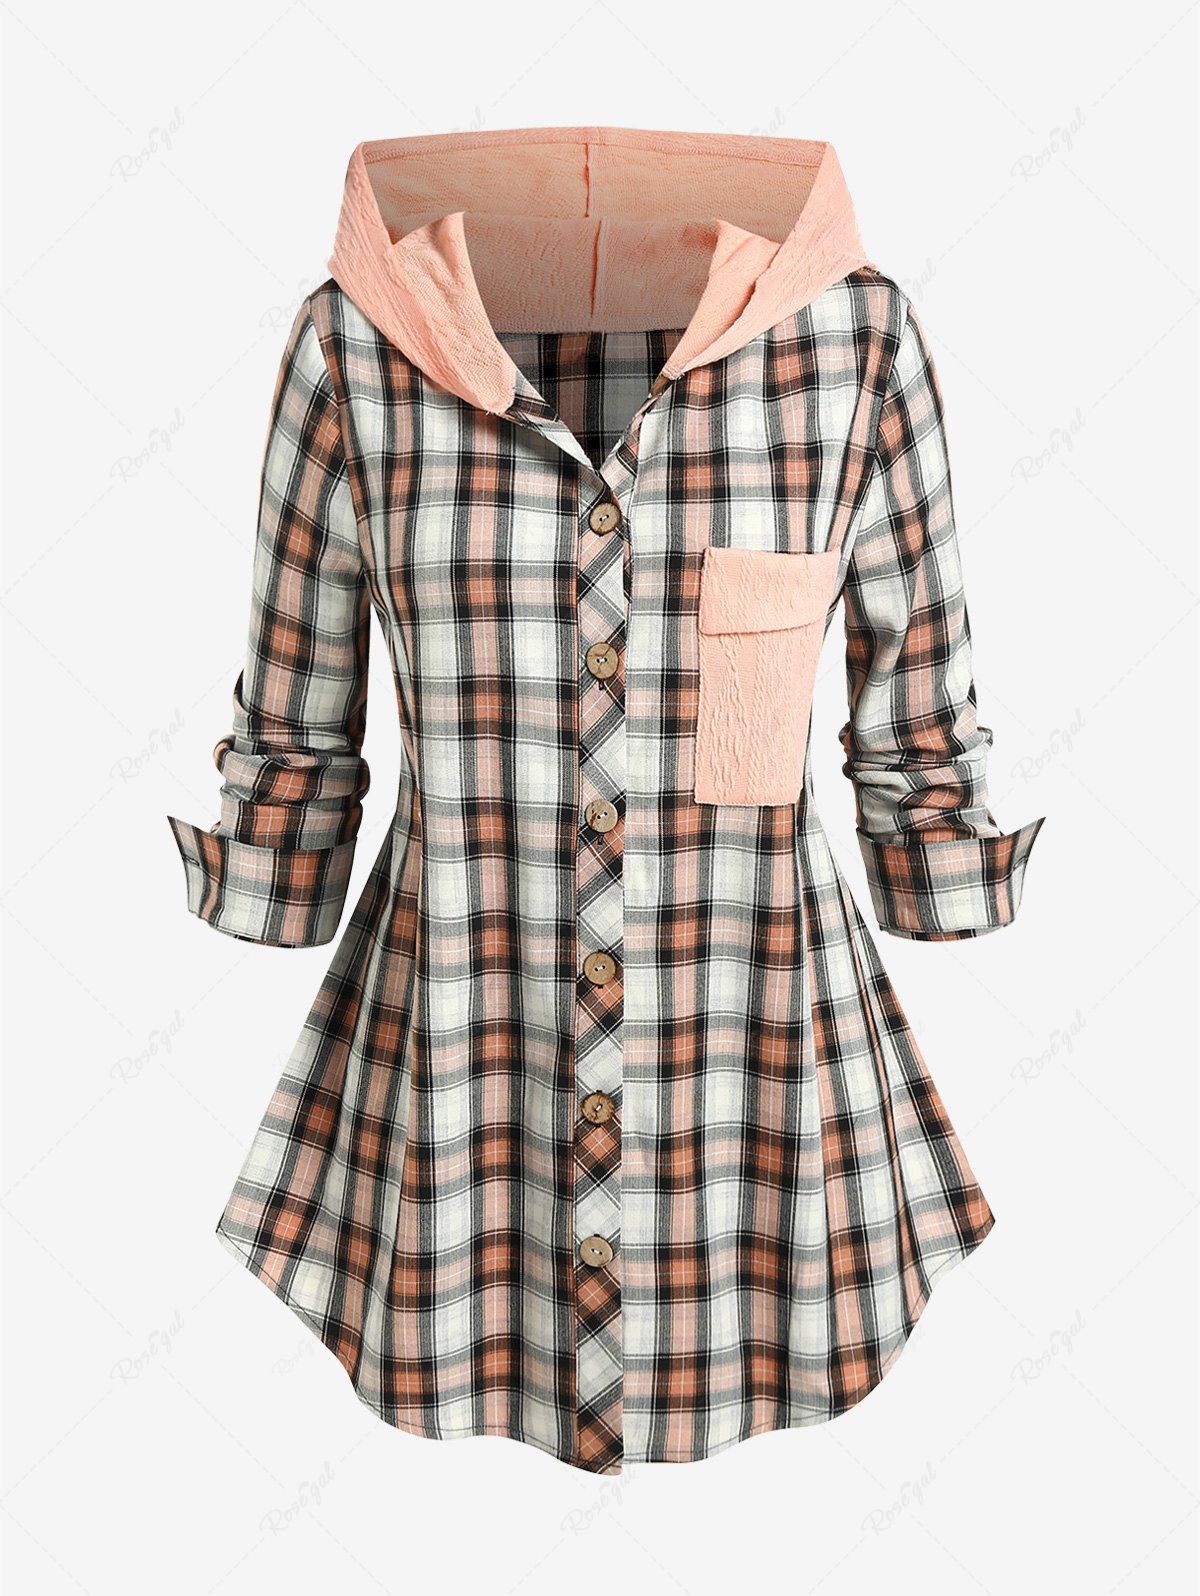 Chic Plus Size Plaid Colorblock Textured Hooded Shirt with Pocket  